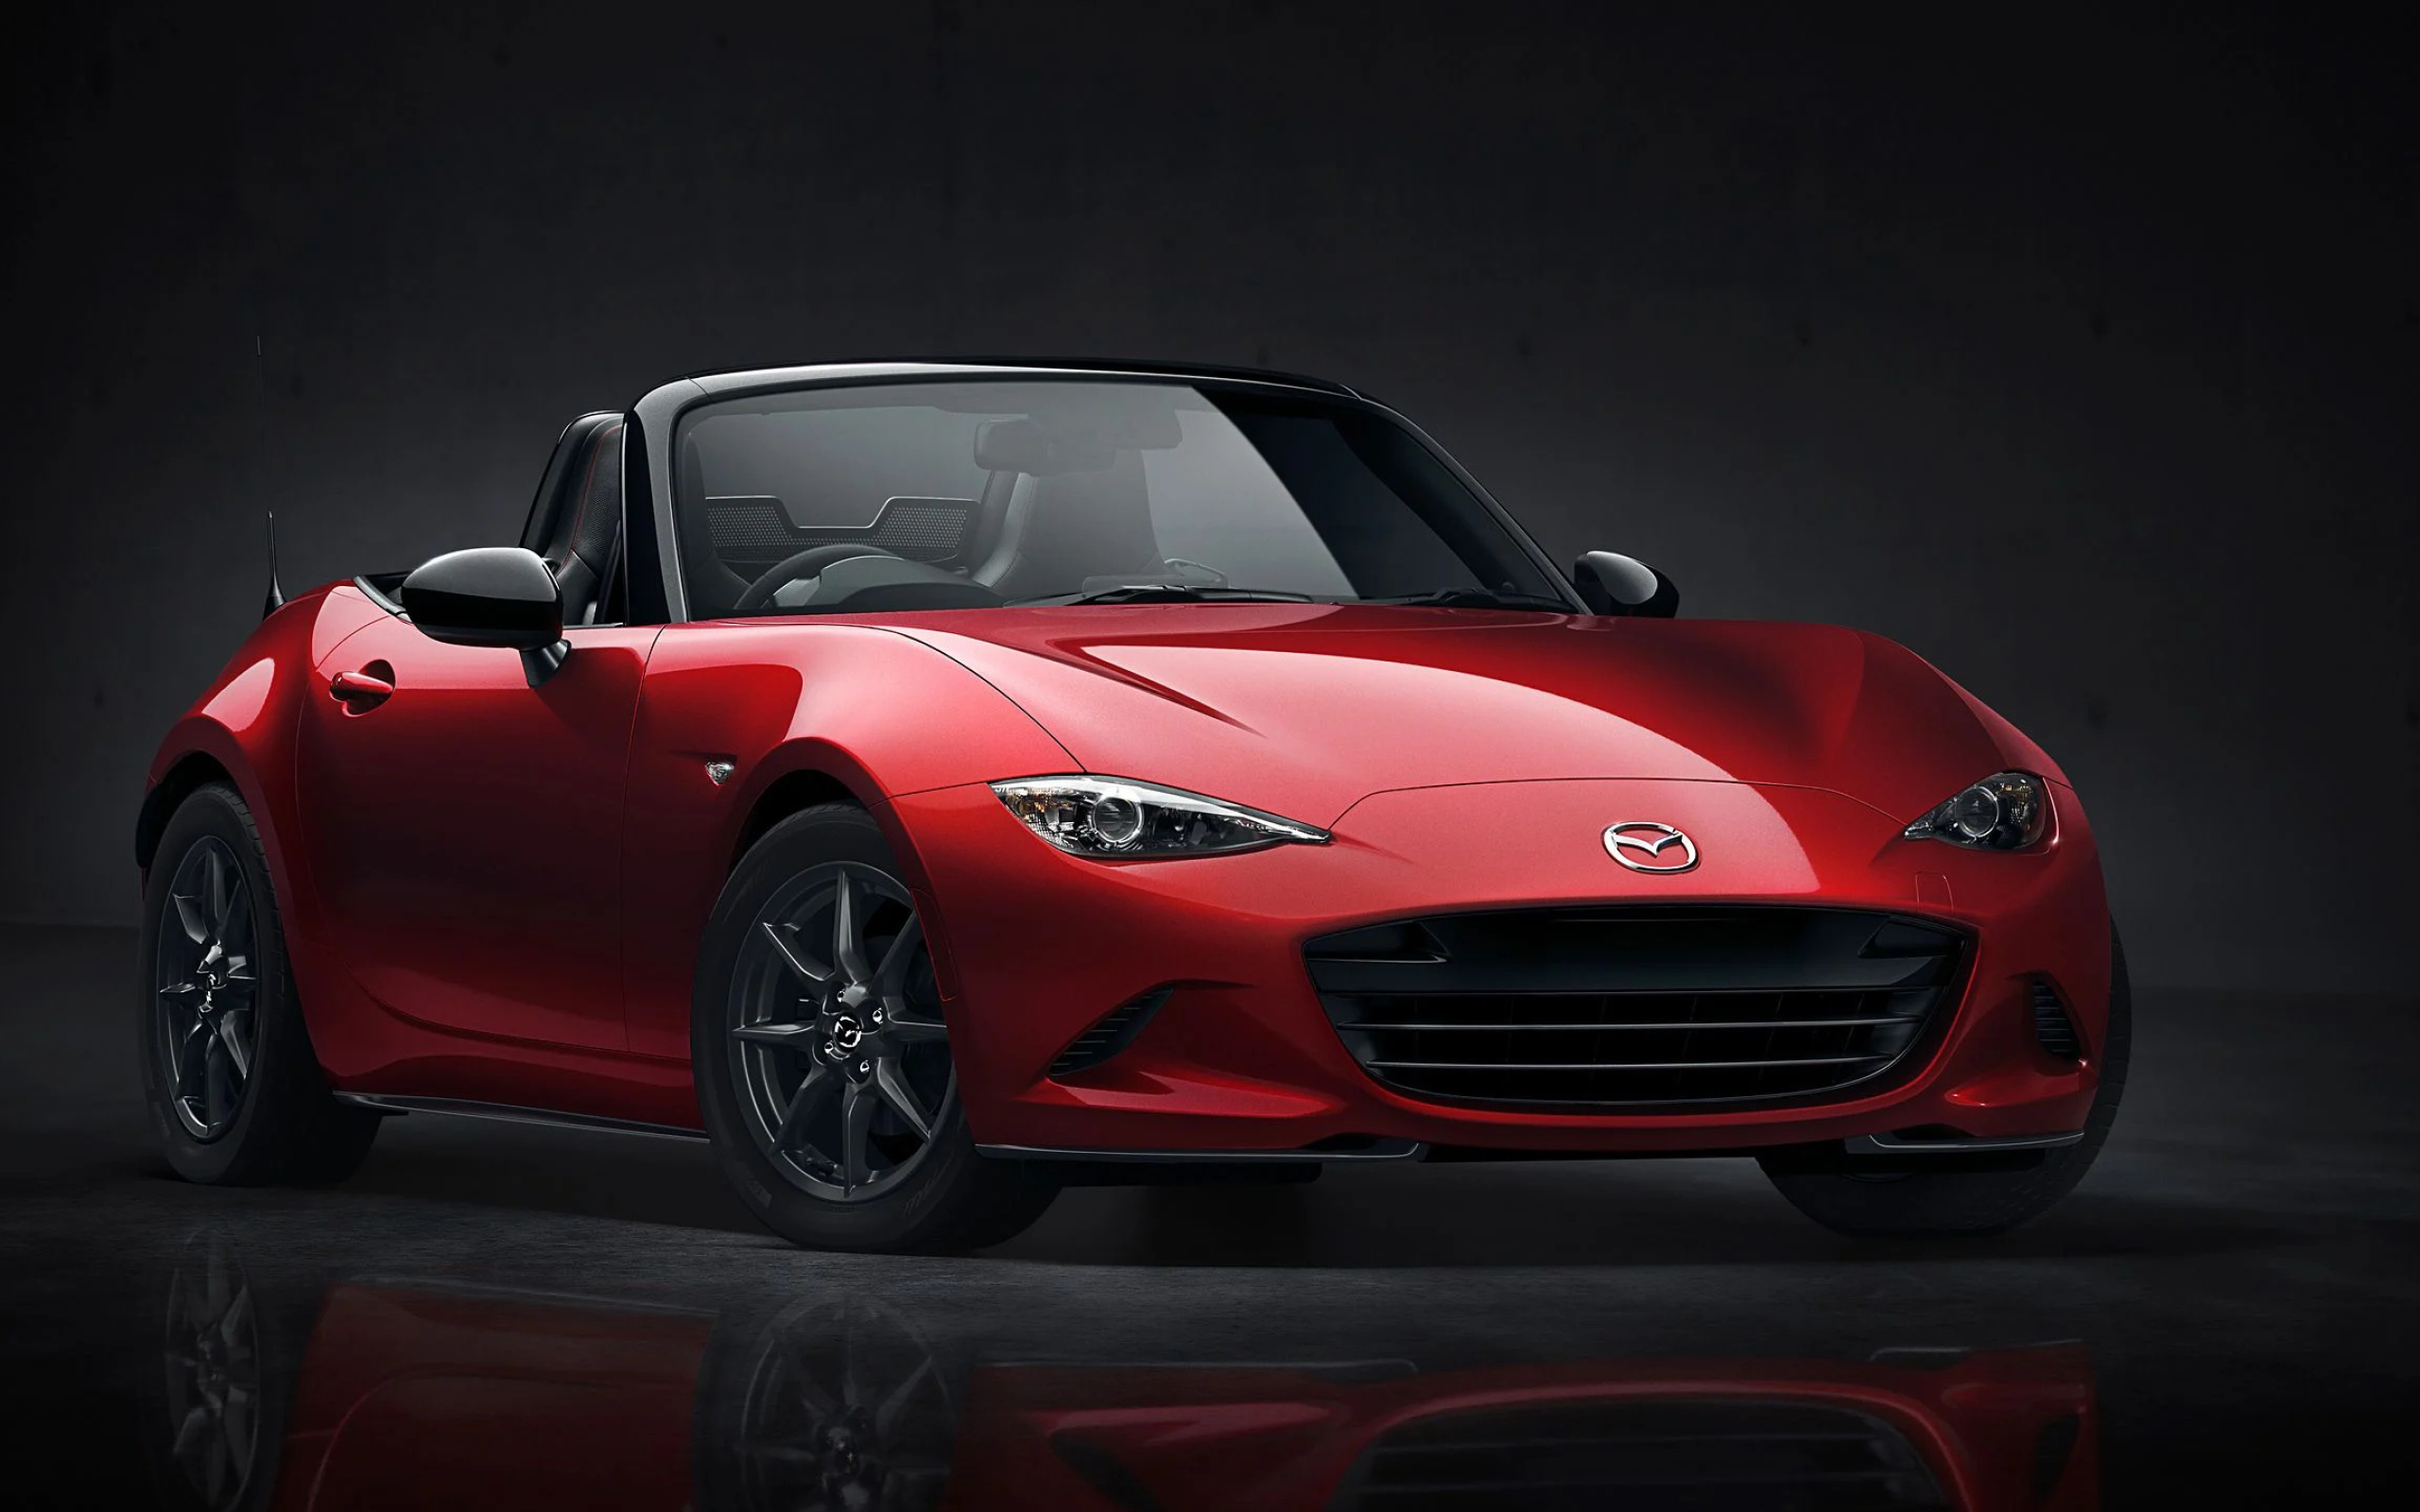 Mazda, Striking wallpapers, High-quality images, Car enthusiasts' delight, 2560x1600 HD Desktop